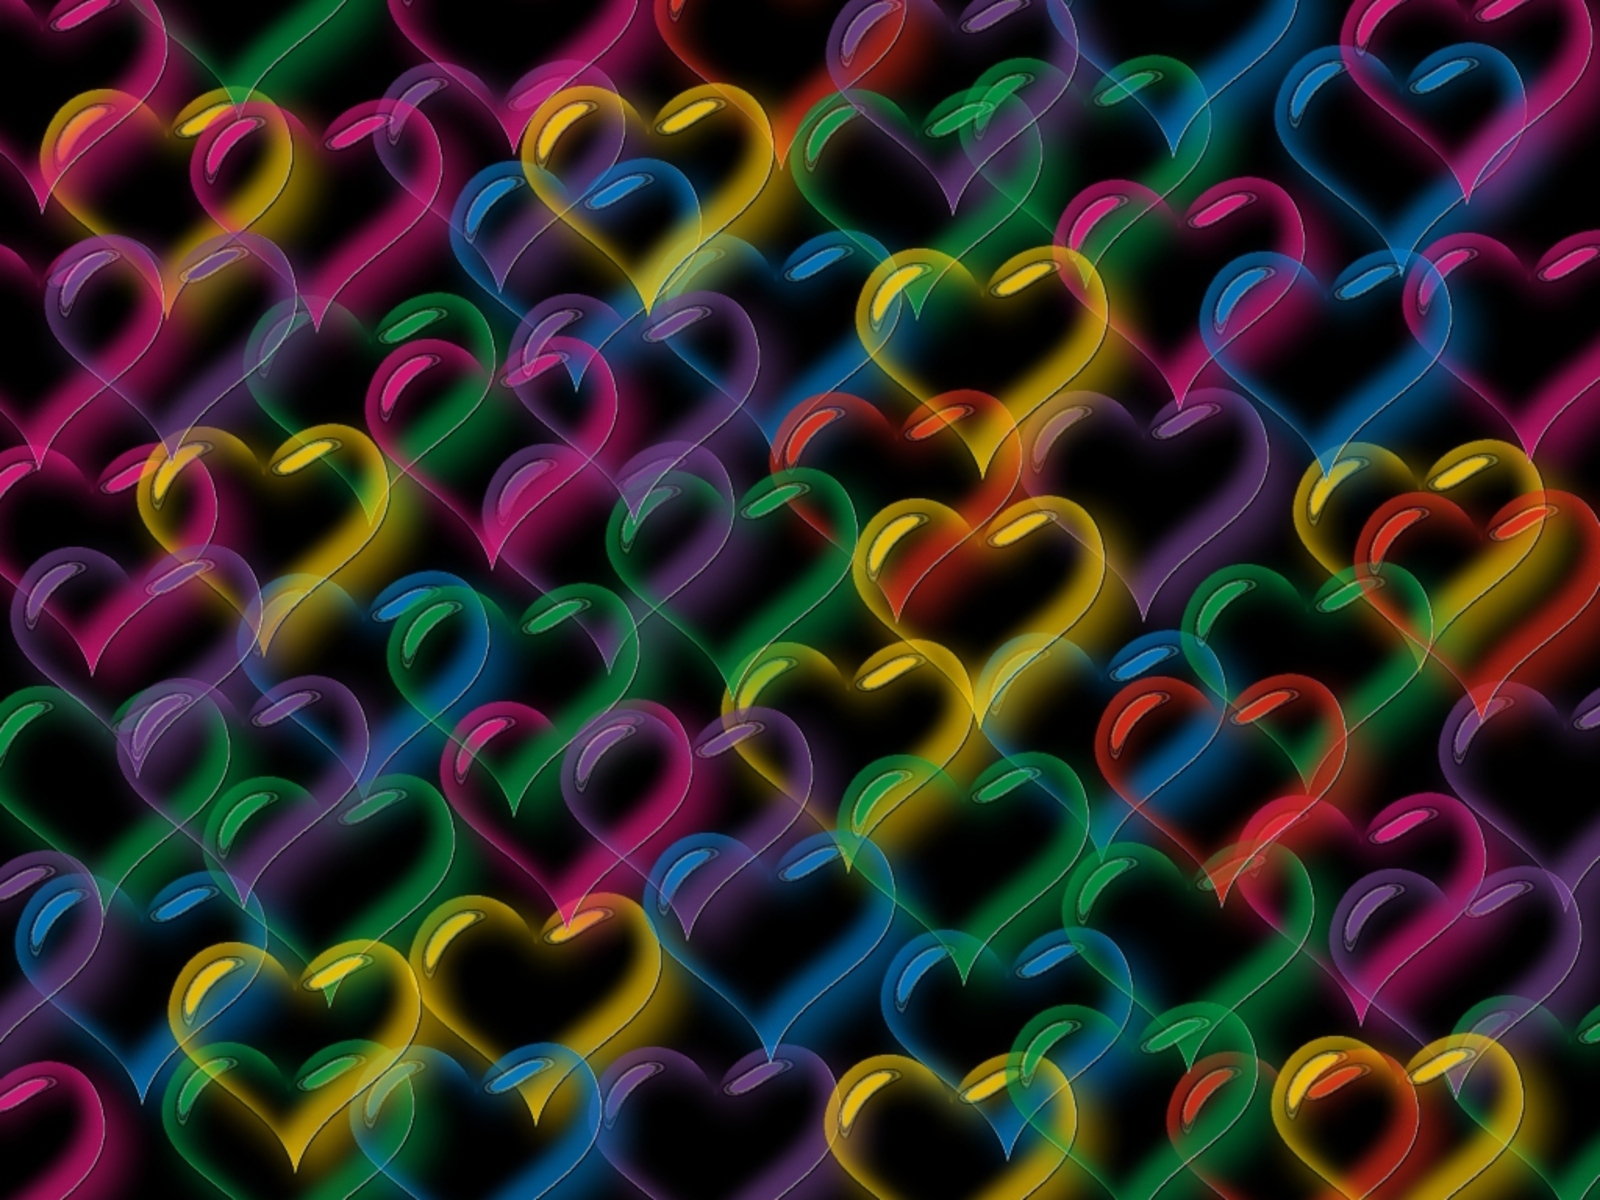 Neon Colors Wallpaper Images amp Pictures   Becuo